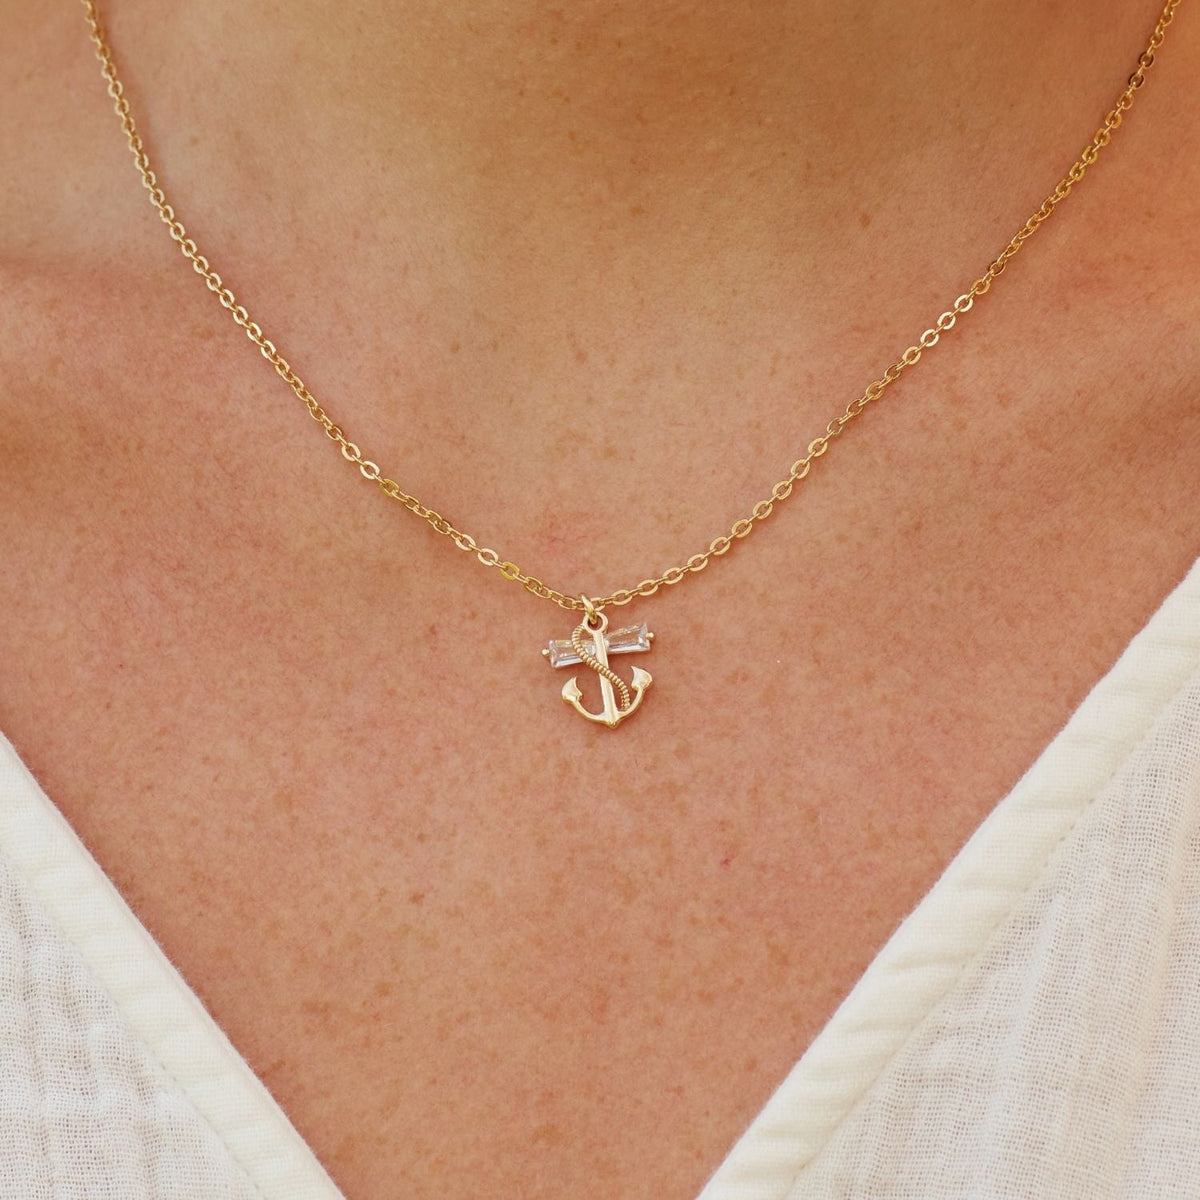 In Loving Memory of your Mom | Her Memory a Treasure | Anchor Necklace